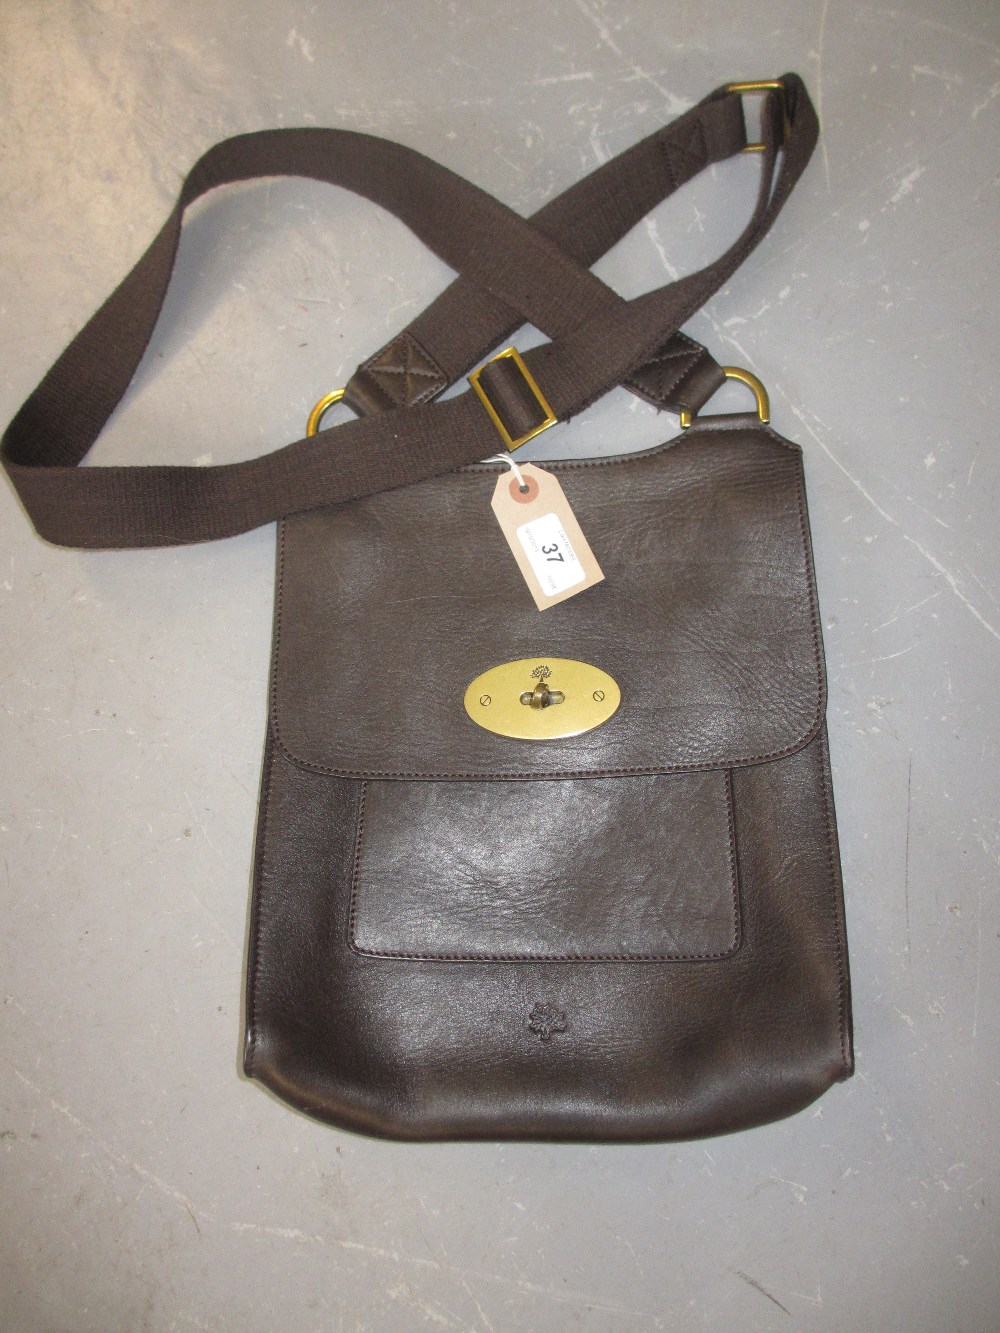 Mulberry brown leather Messenger bag